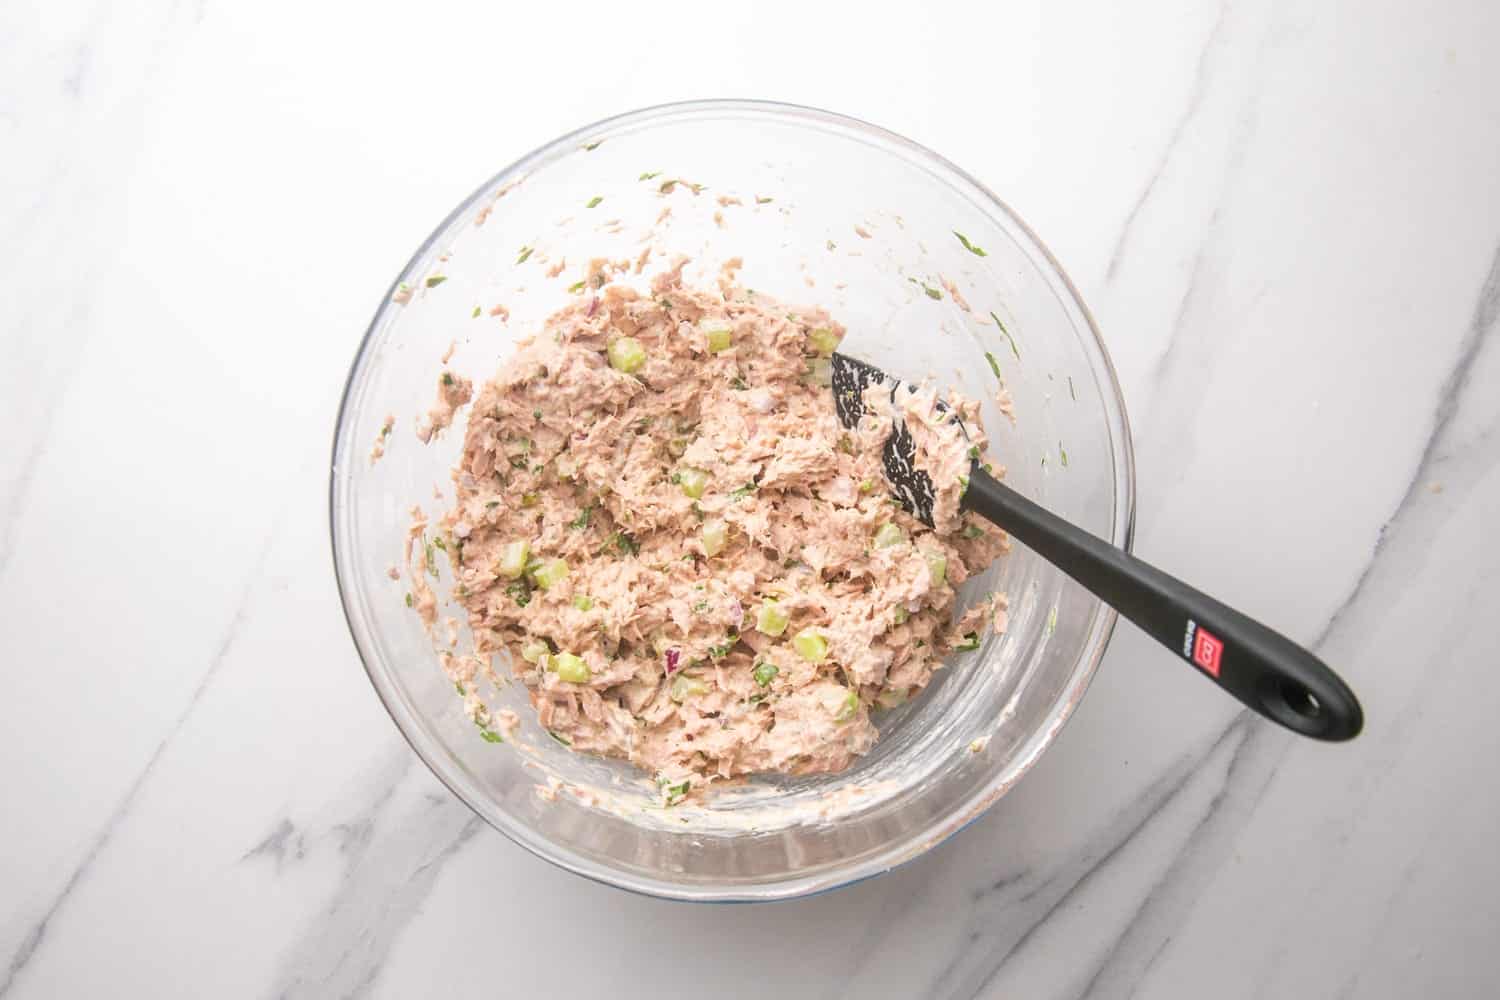 a glass bowl filled with tuna salad that is being stirred with a spatula.